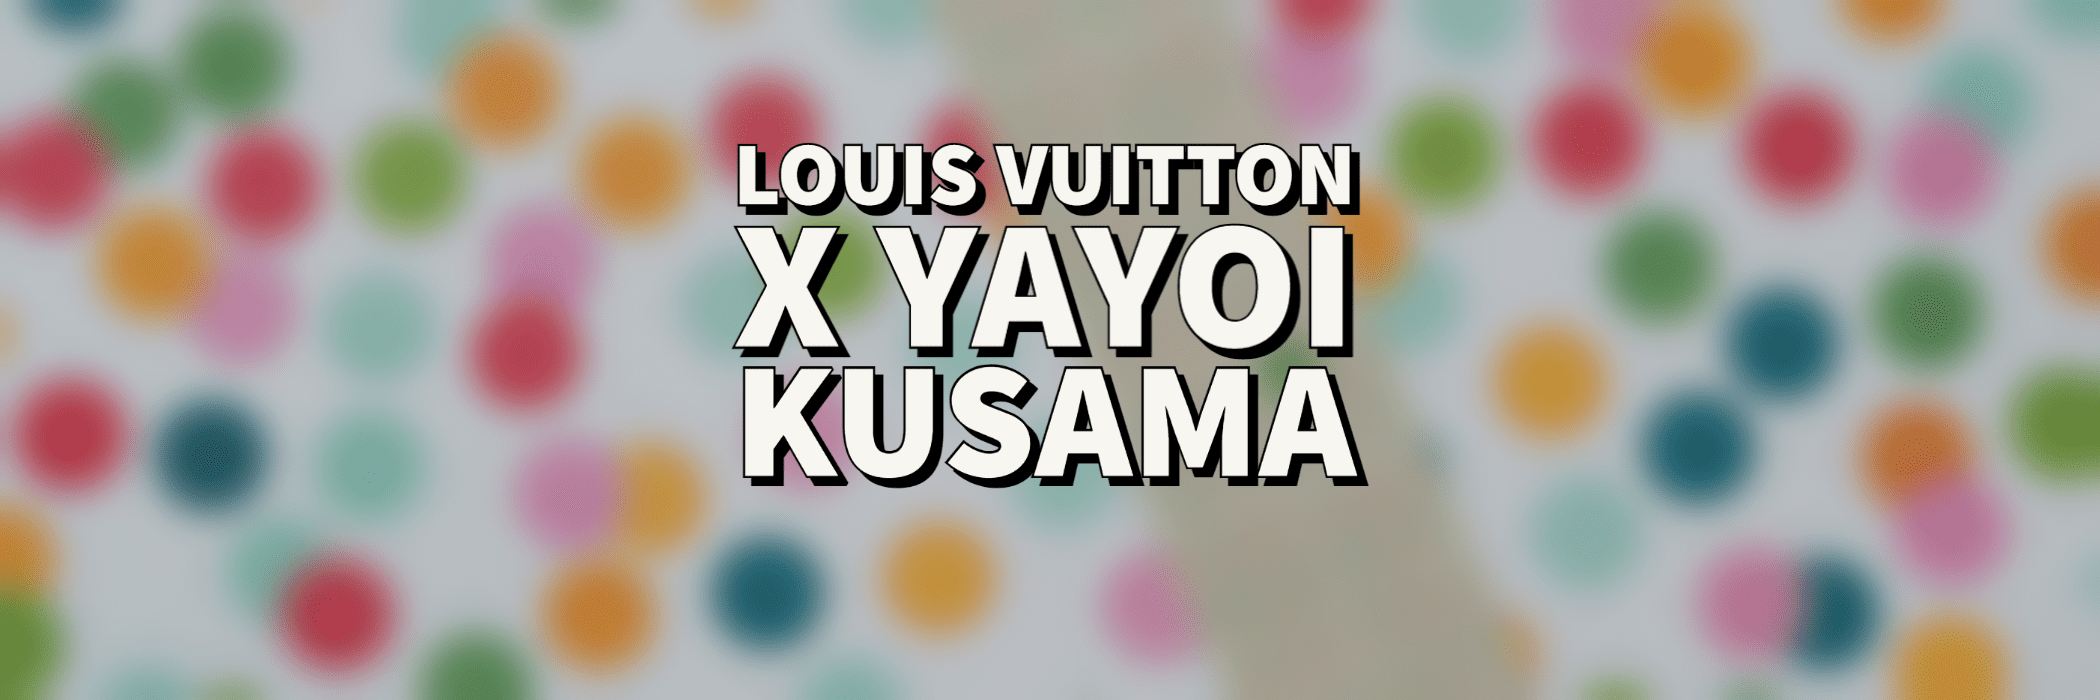 Louis Vuitton and Yayoi Kusama team up after a decade with their LV x Yayoi  Kusama collaboration